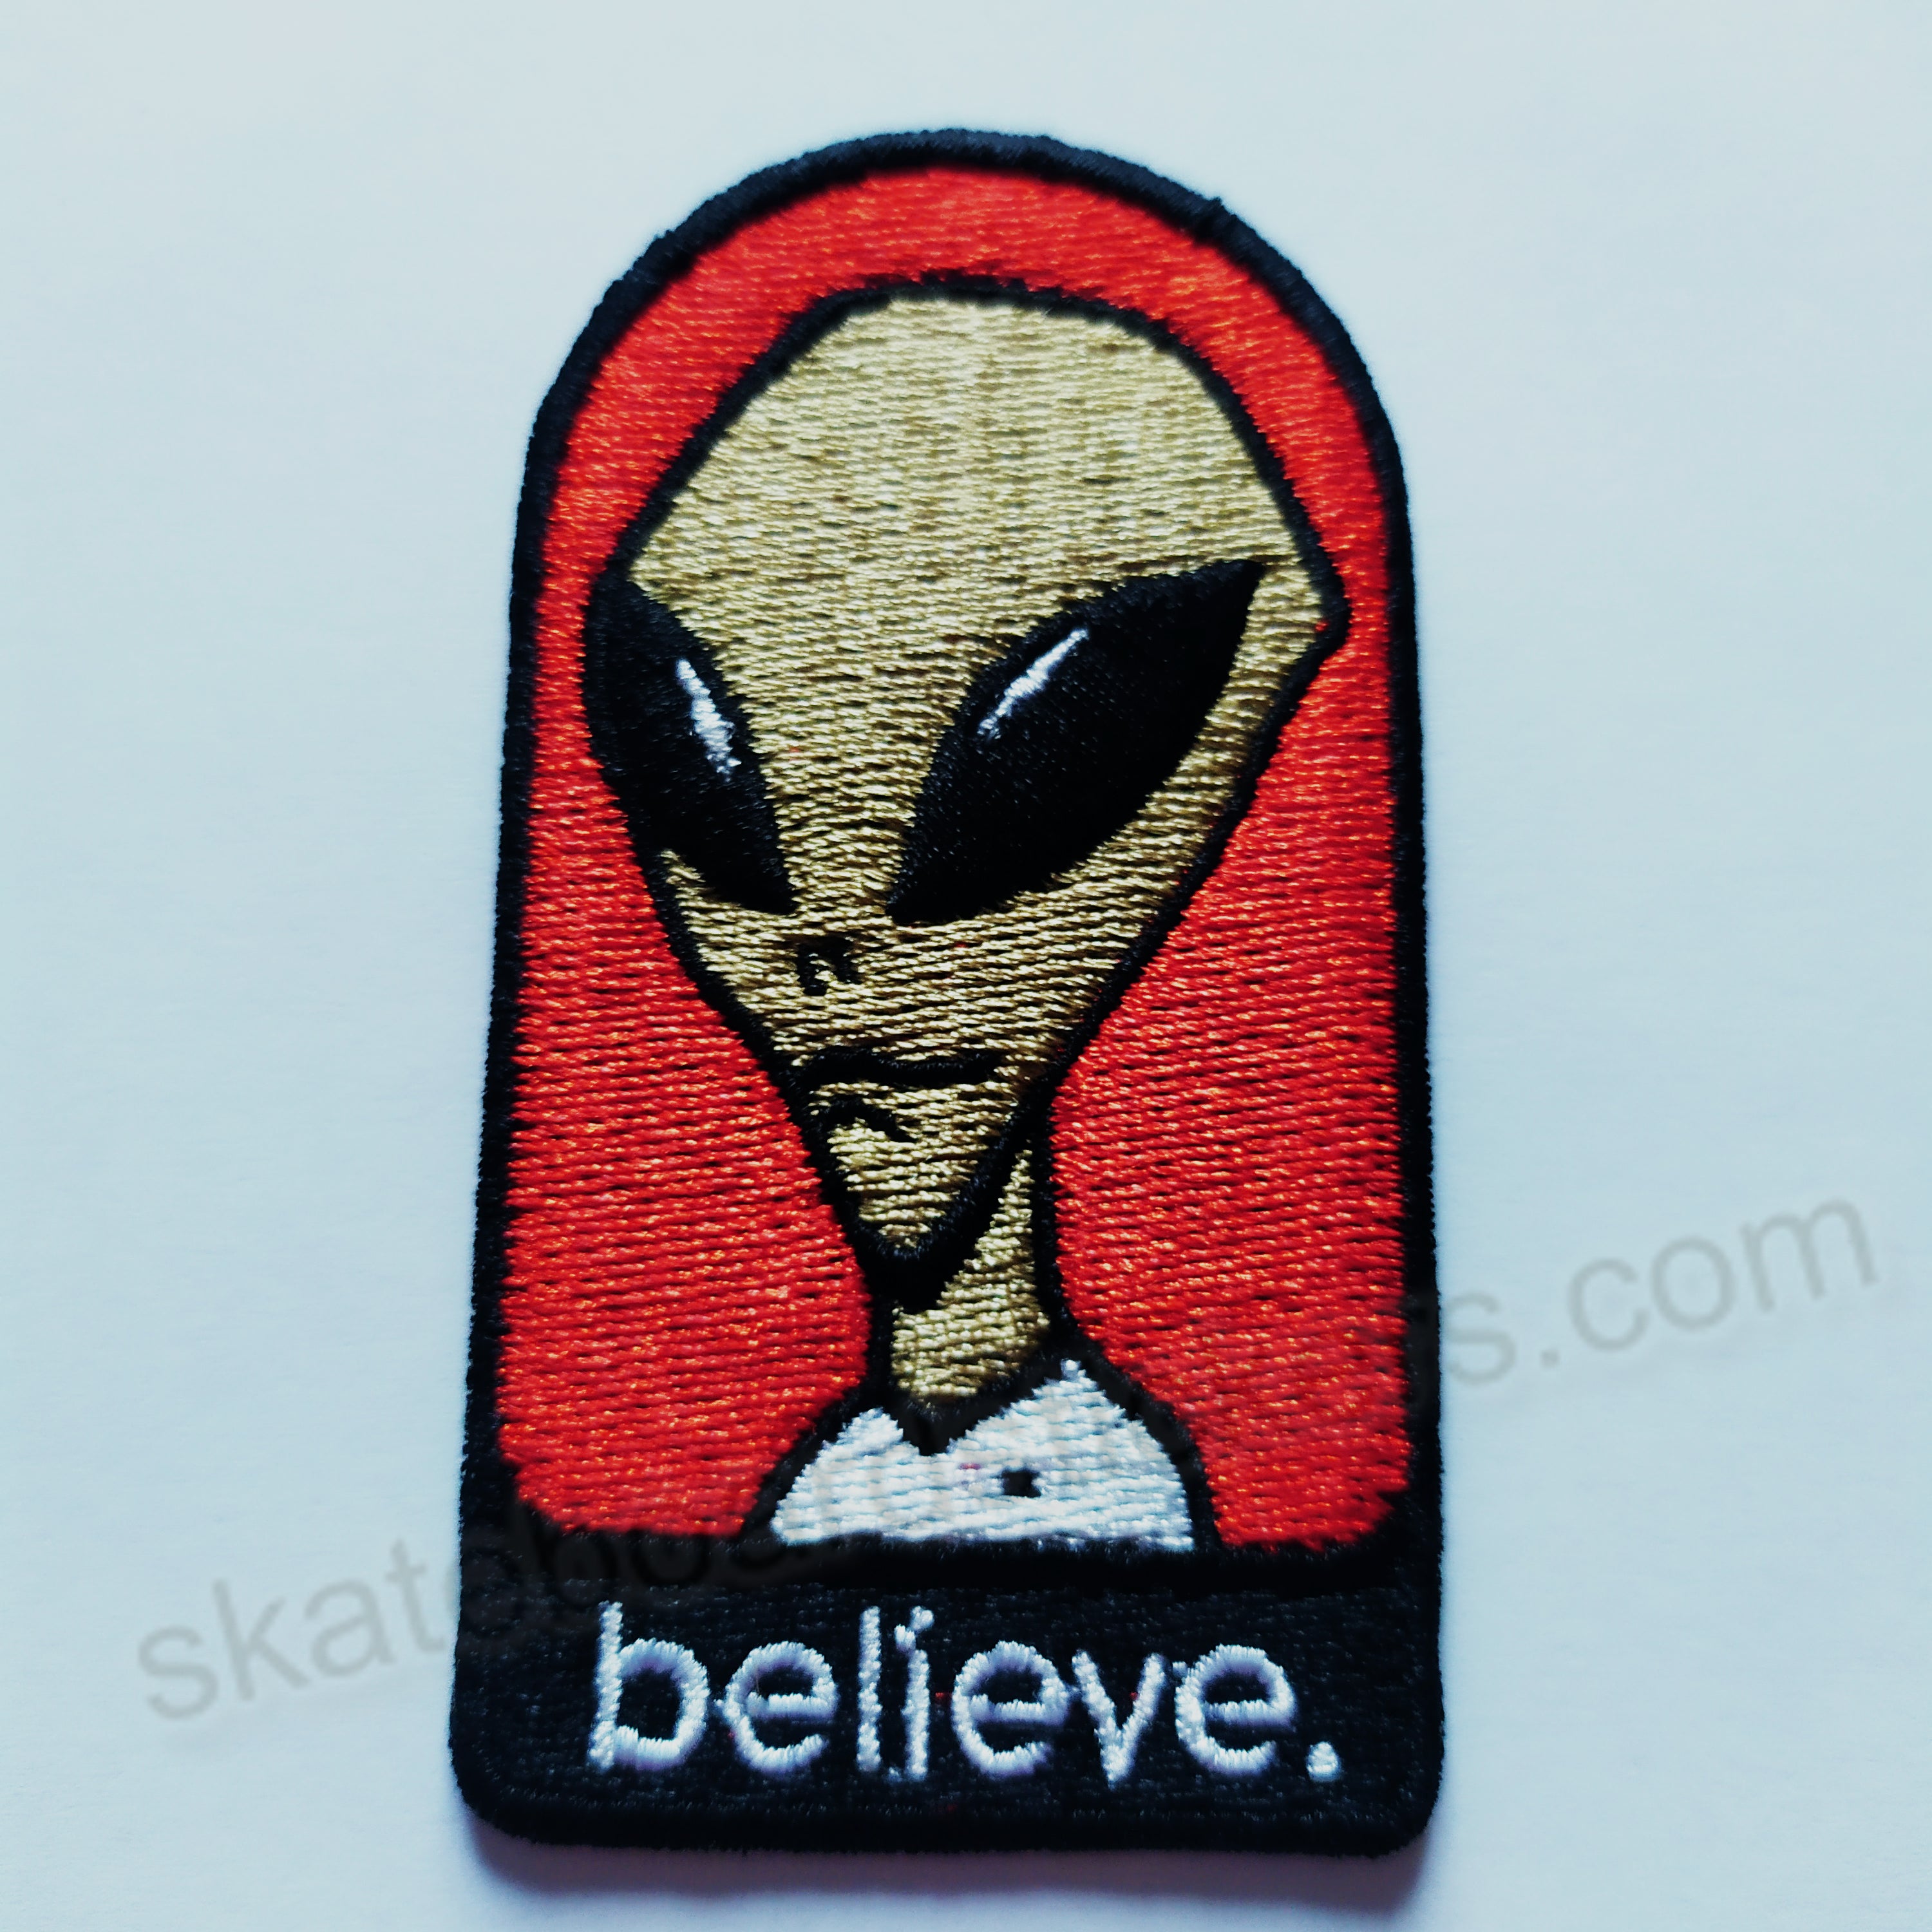 Alien Workshop - Believe Skate Patch - Iron On/Embroidered - 7.5cm high approx - SkateboardStickers.com